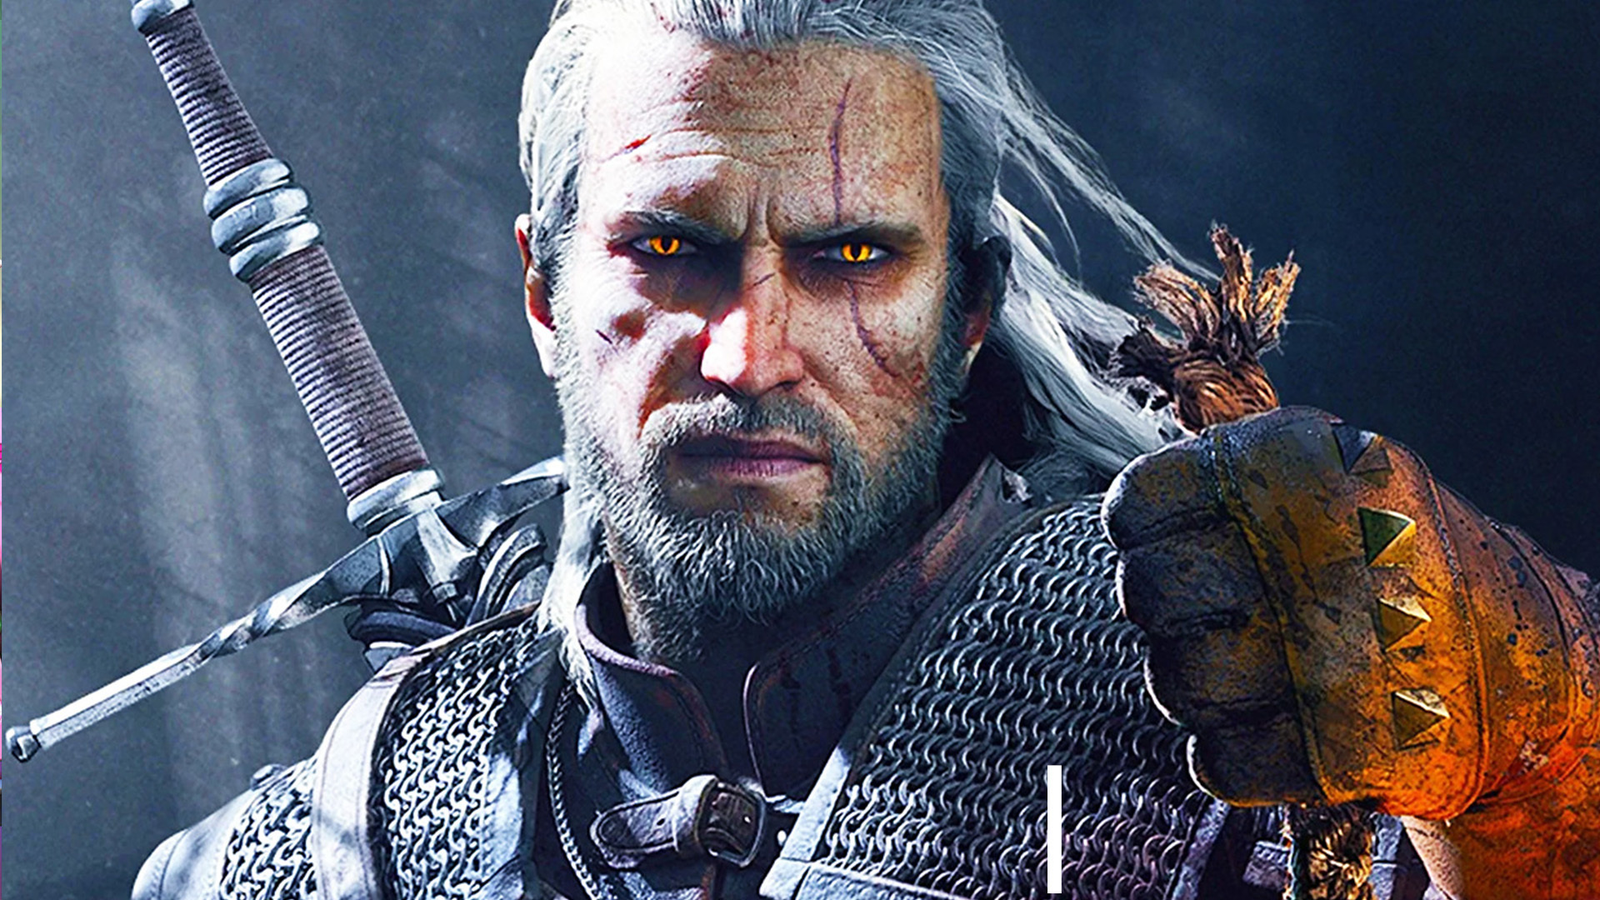 The Witcher 3 Next-Gen patch Release. Let's see how it performs on